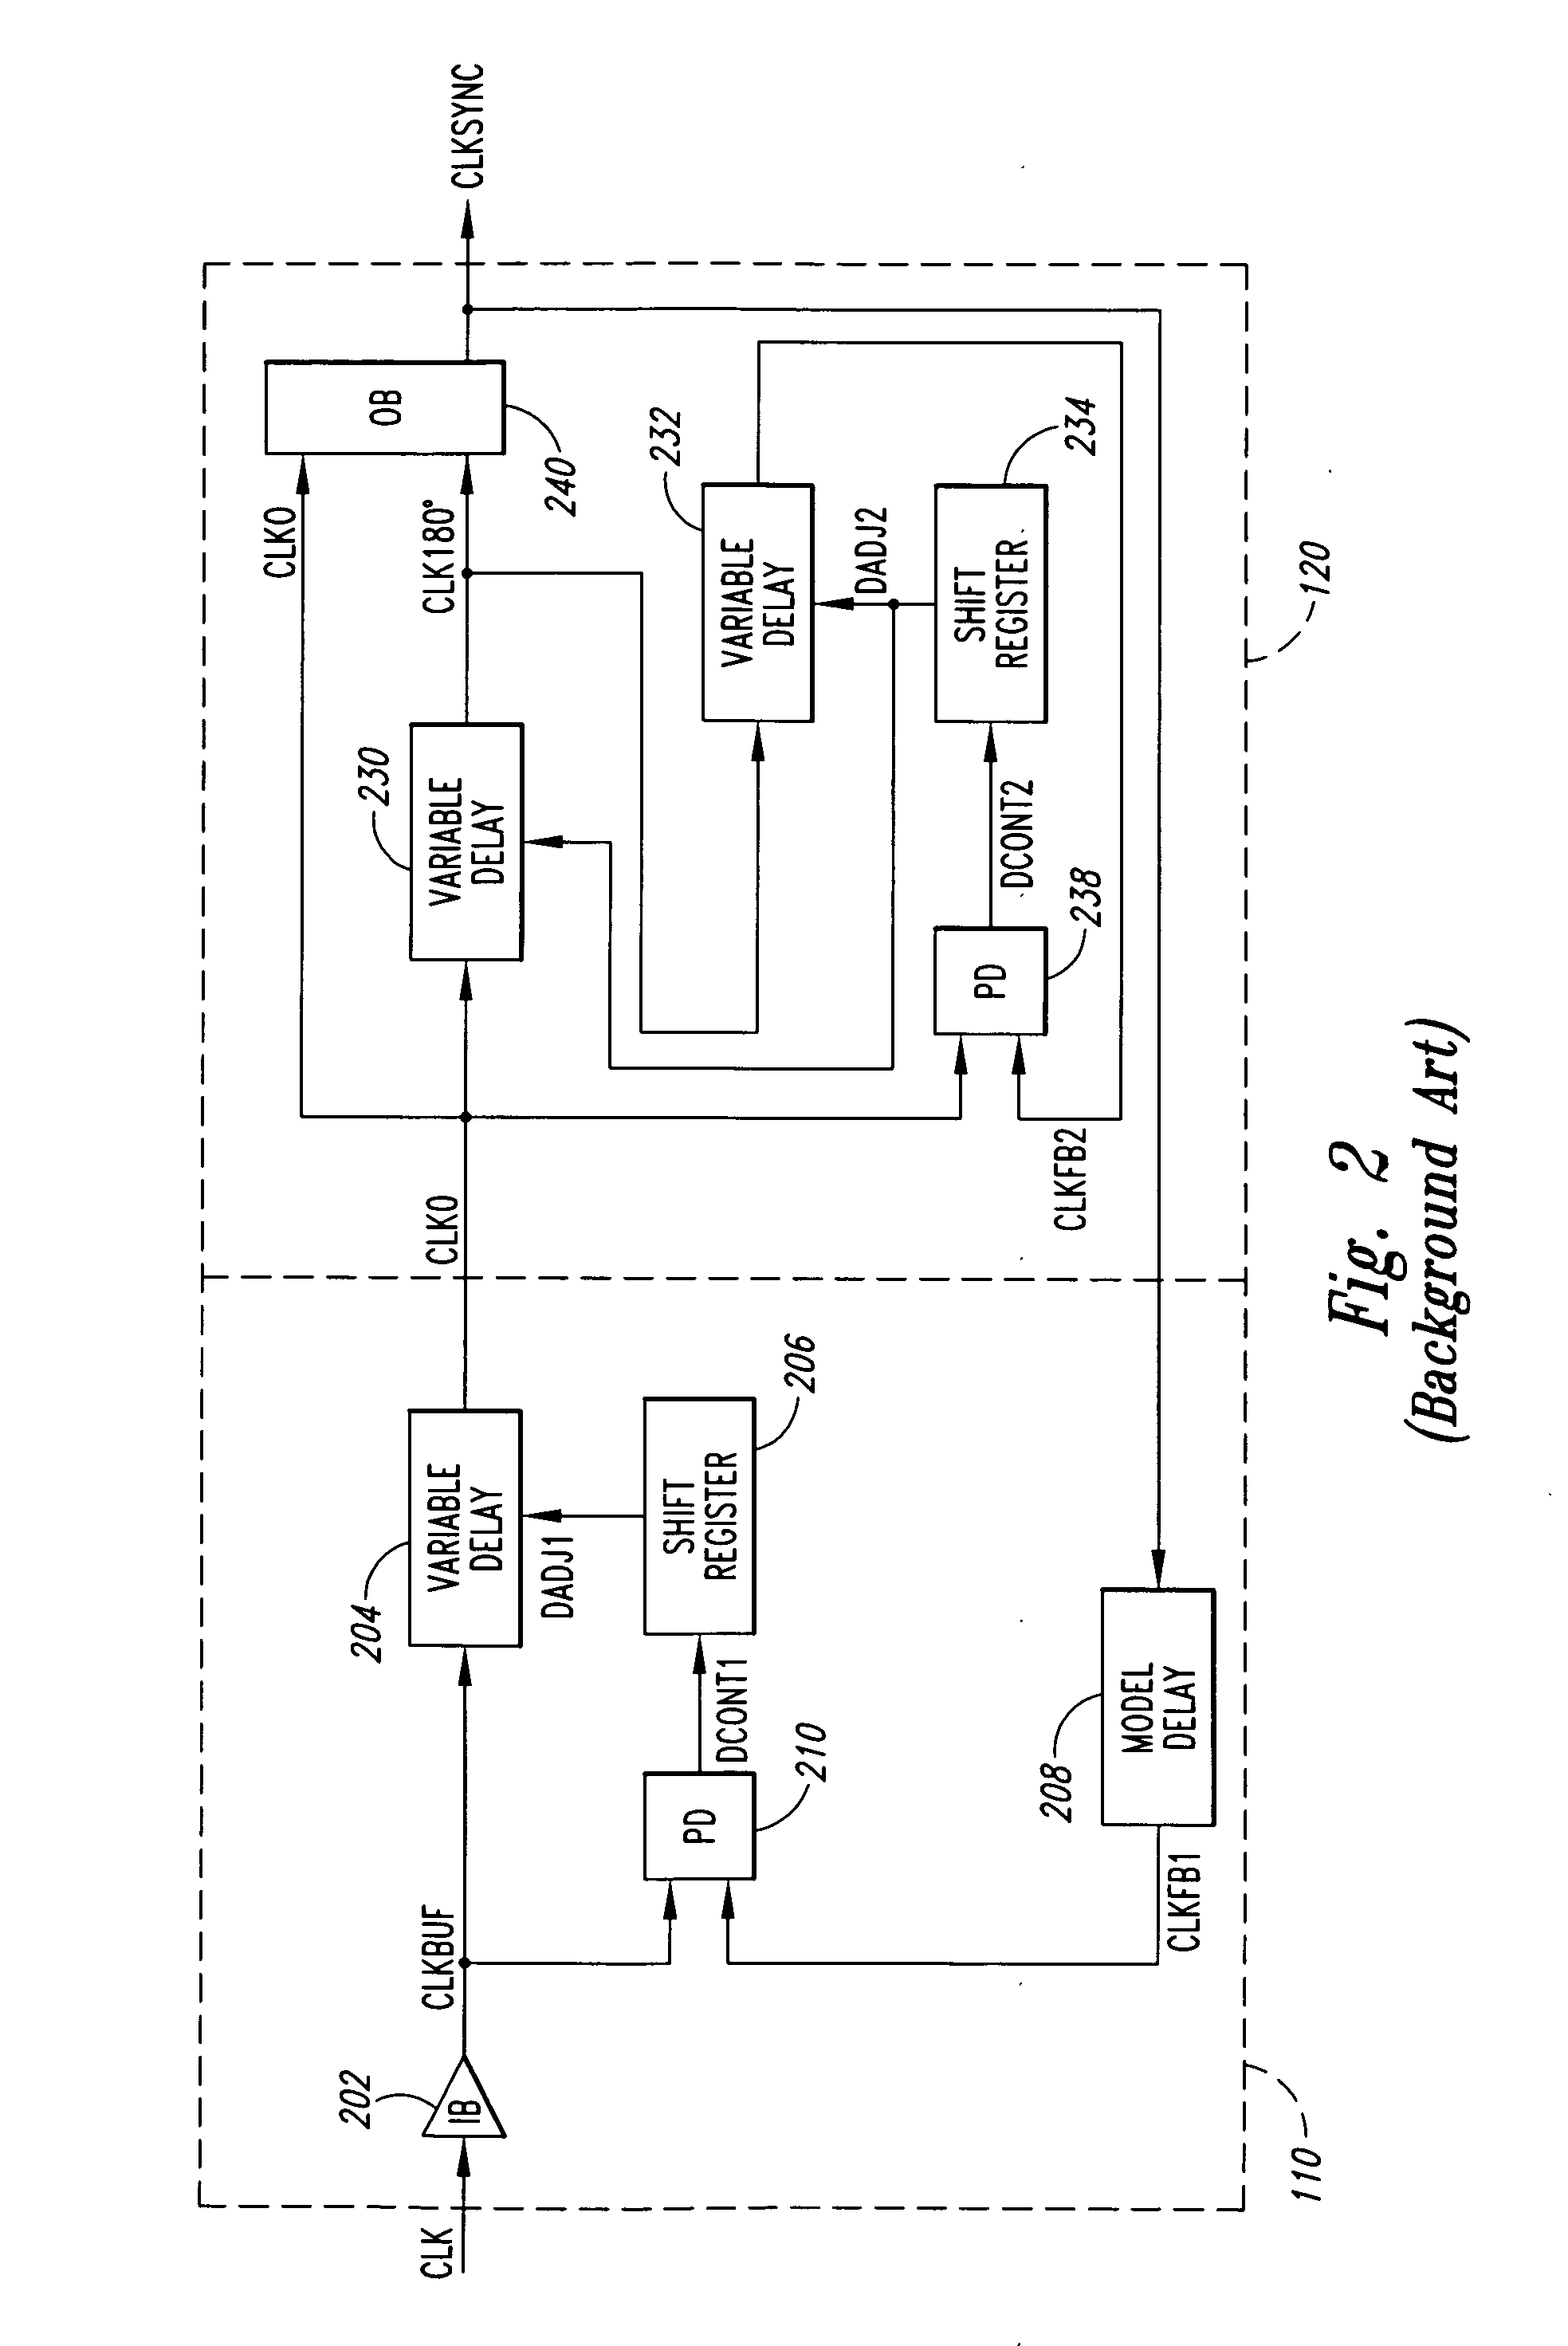 Clock generator having a delay locked loop and duty cycle correction circuit in a parallel configuration